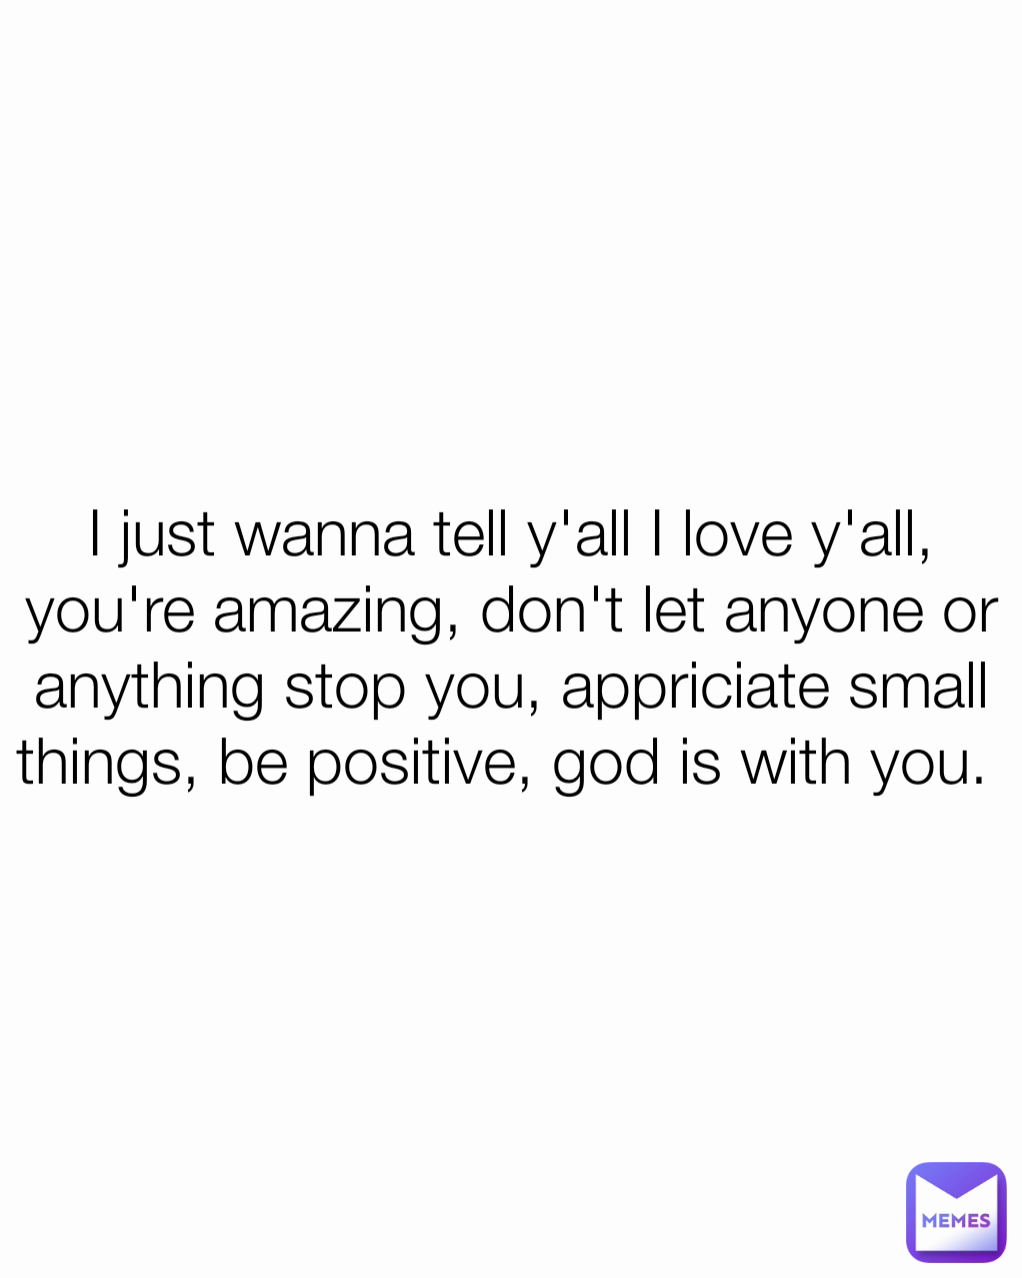 I just wanna tell y'all I love y'all, you're amazing, don't let anyone or anything stop you, appriciate small things, be positive, god is with you. 